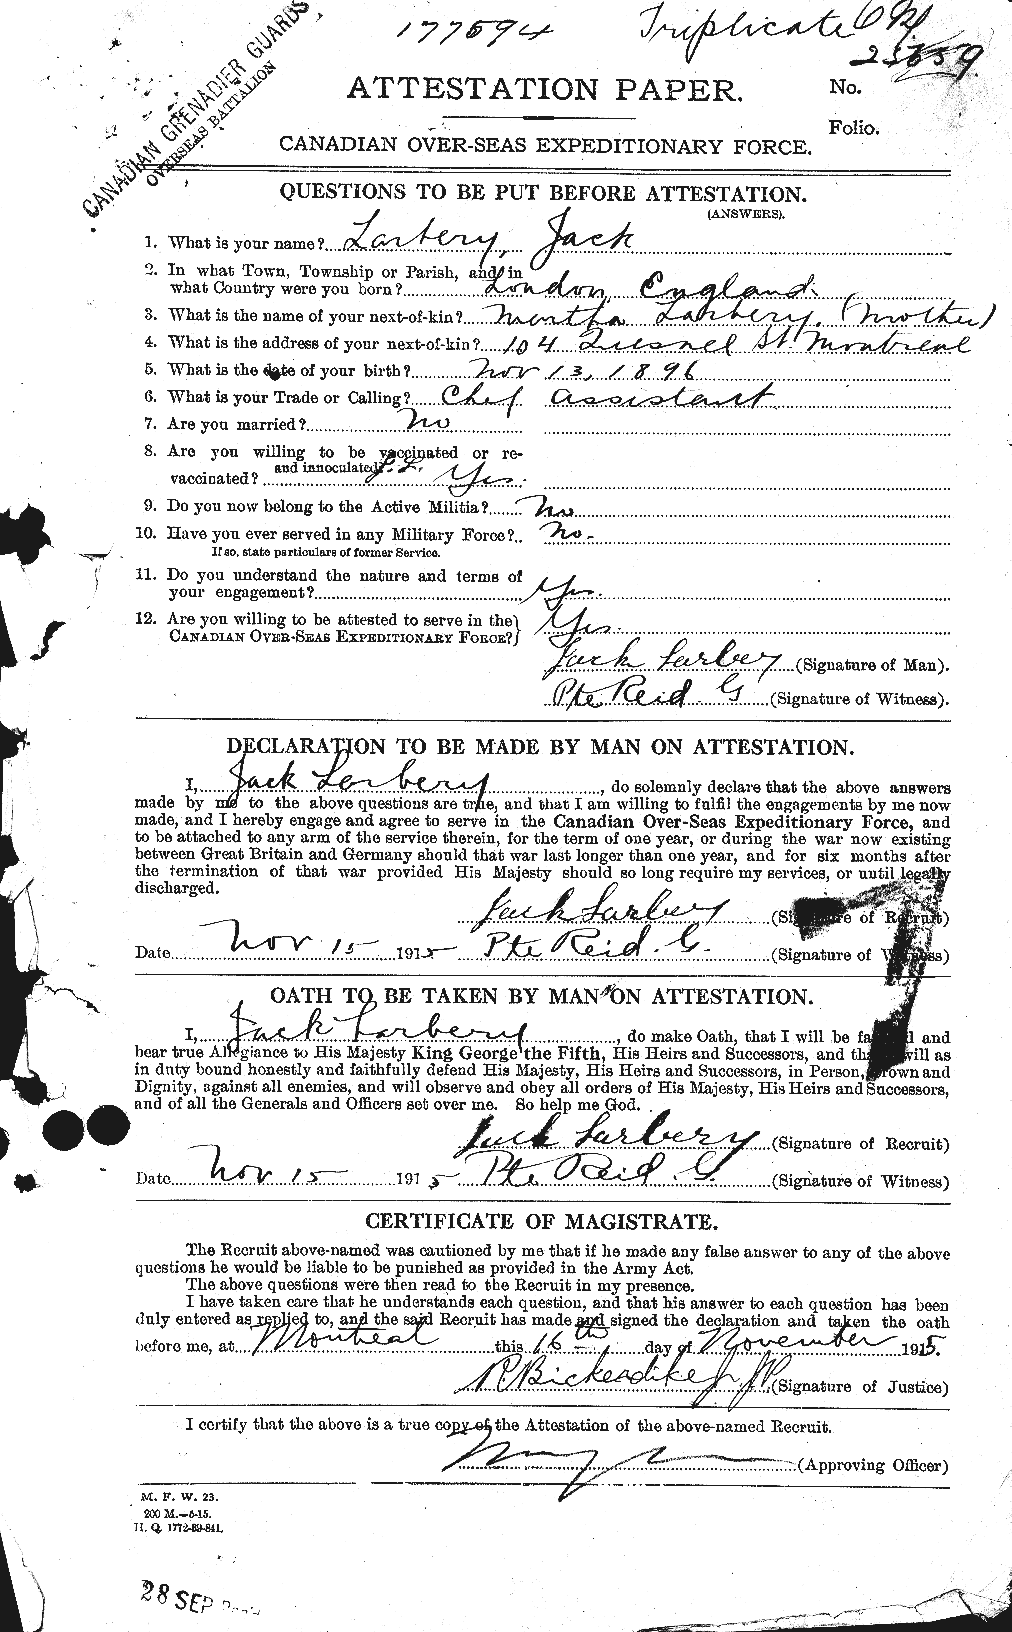 Personnel Records of the First World War - CEF 449216a